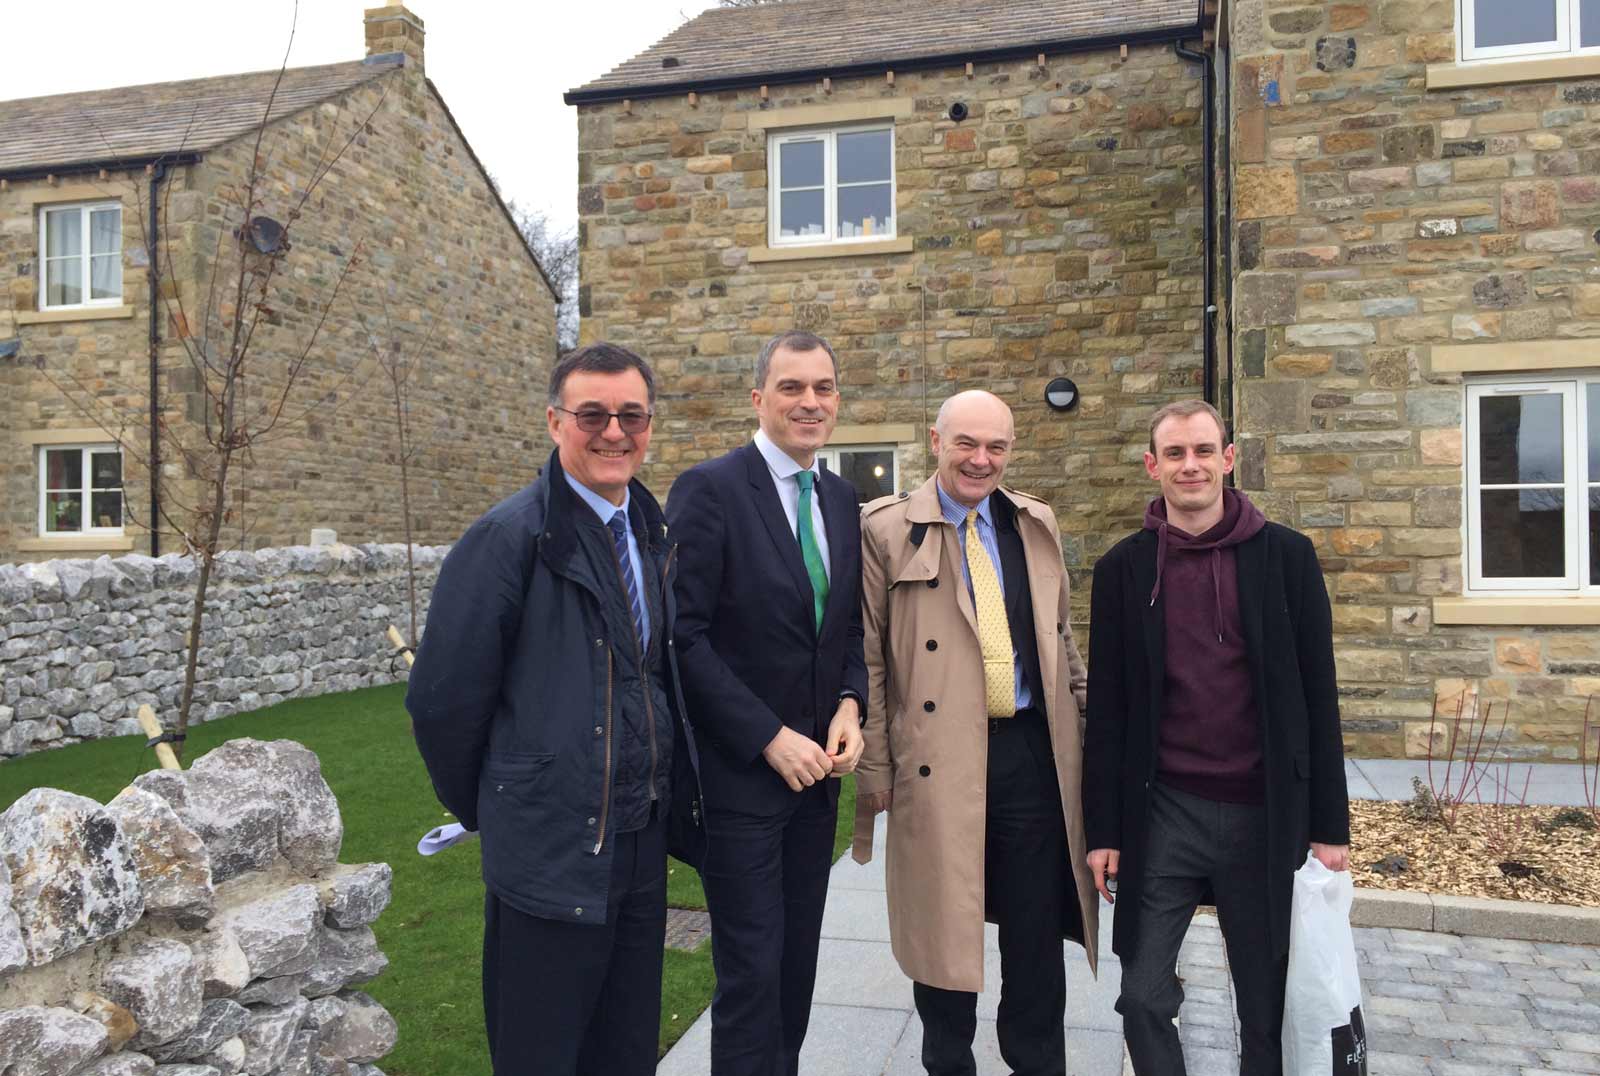 ulian Smith MP visited Yorkshire Housing’s new development in Grassington with the Chief Executive of the housing group, Mervyn Jones